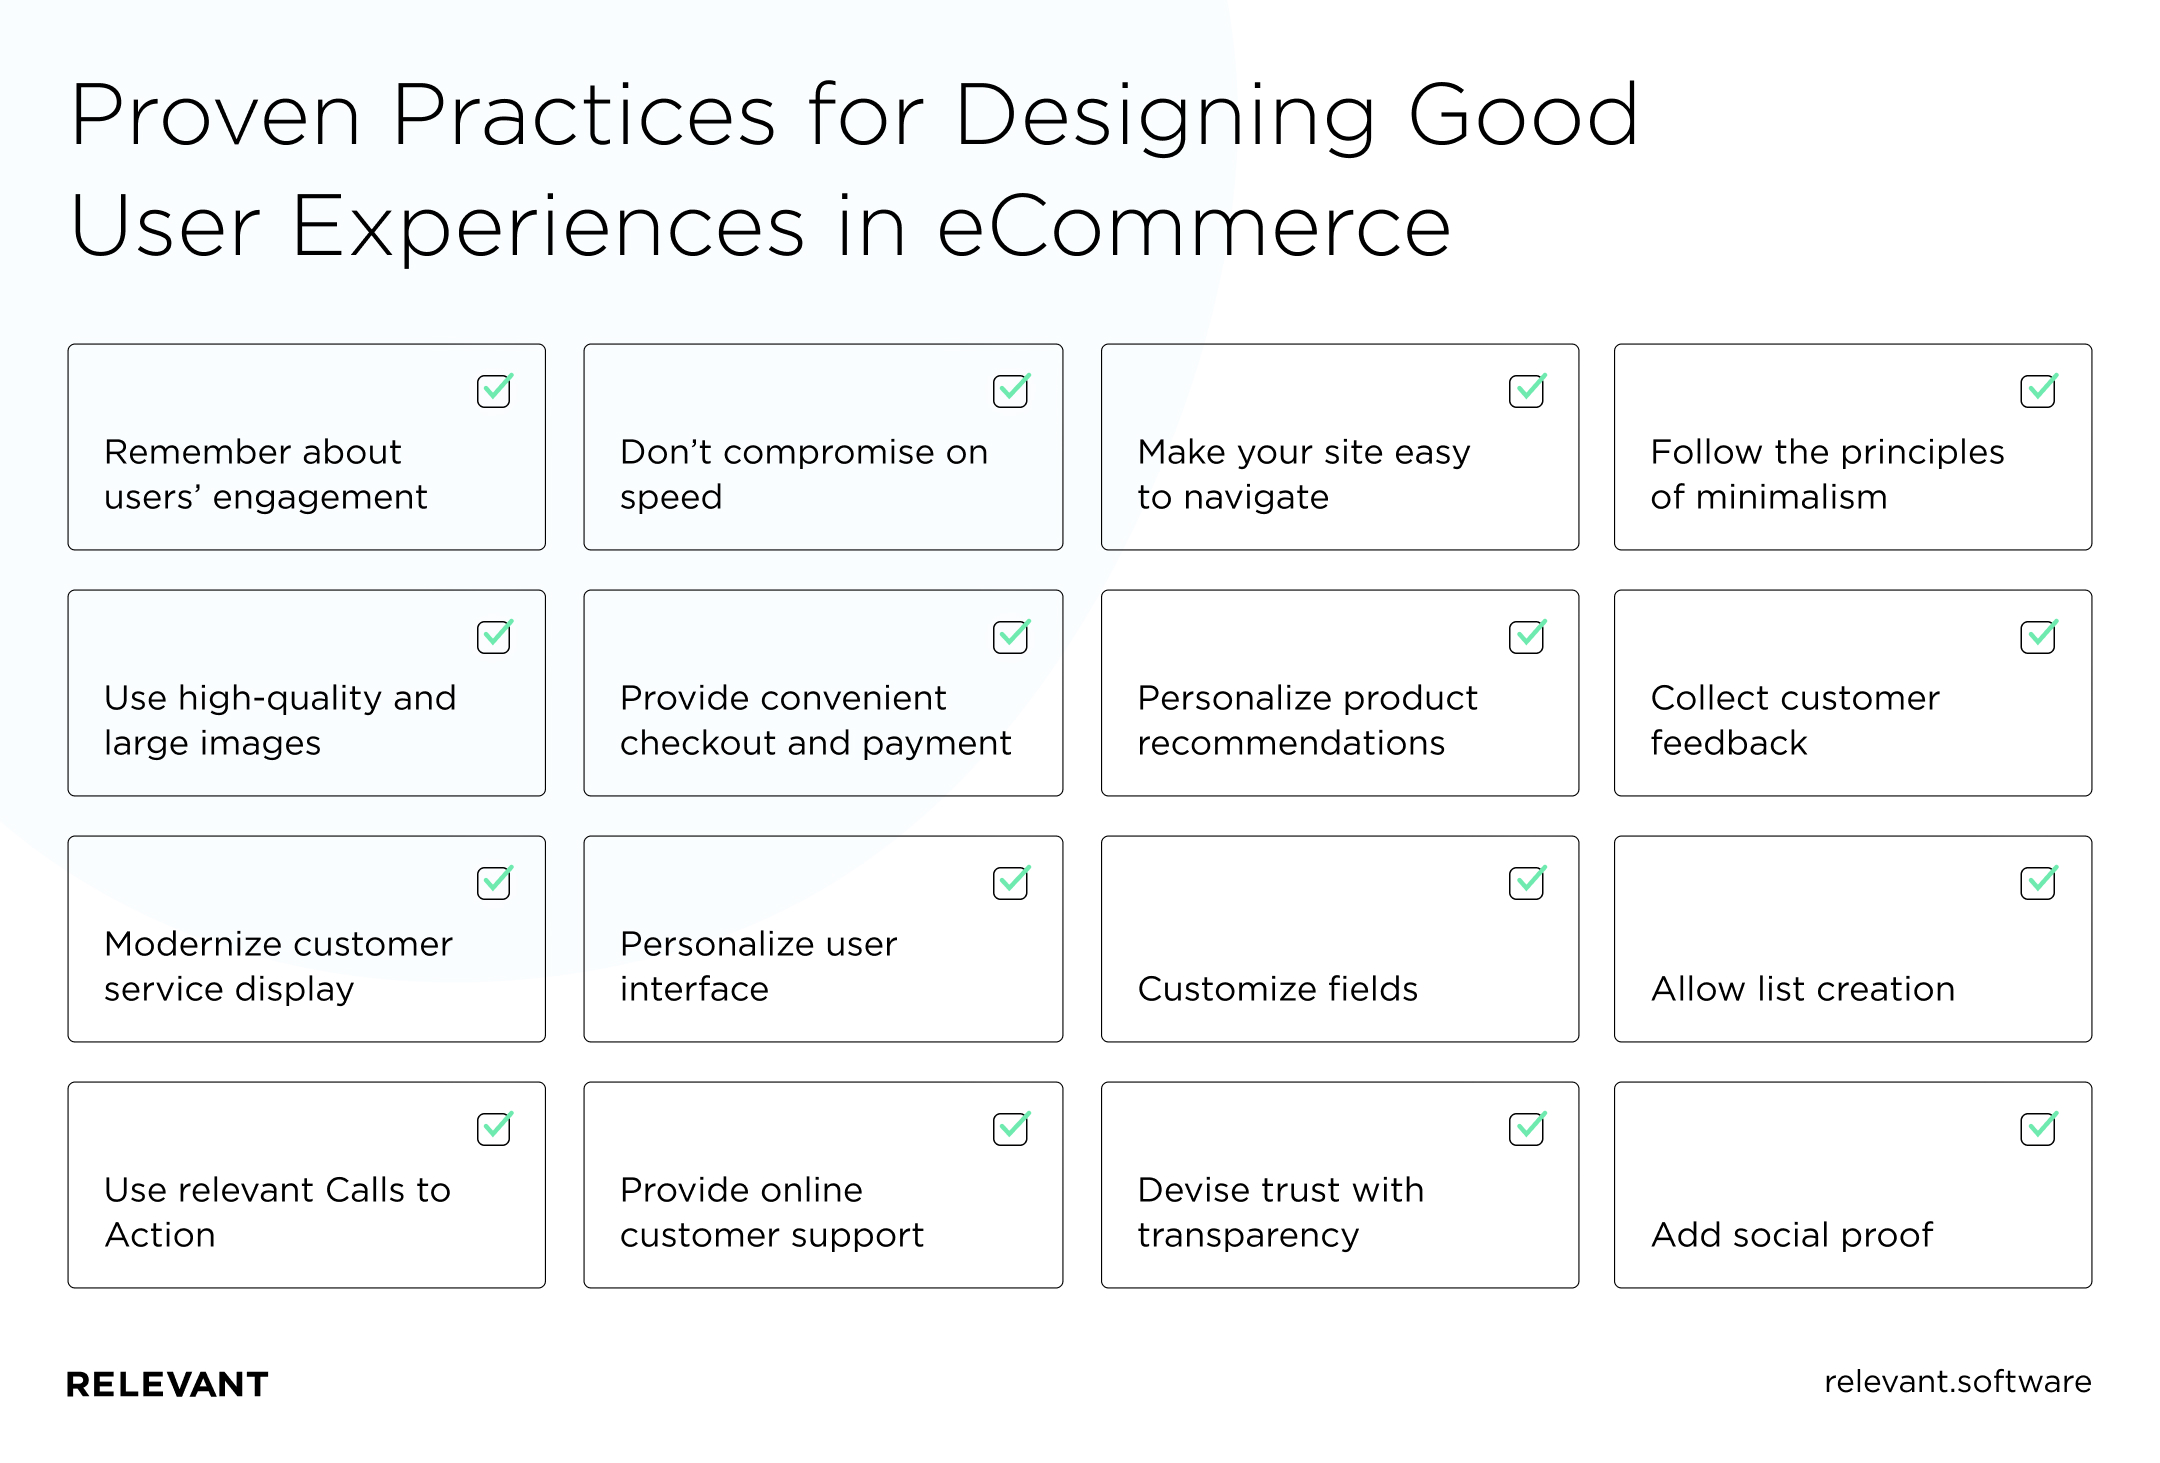 Proven Practices for Designing Good User Experiences in eCommerce